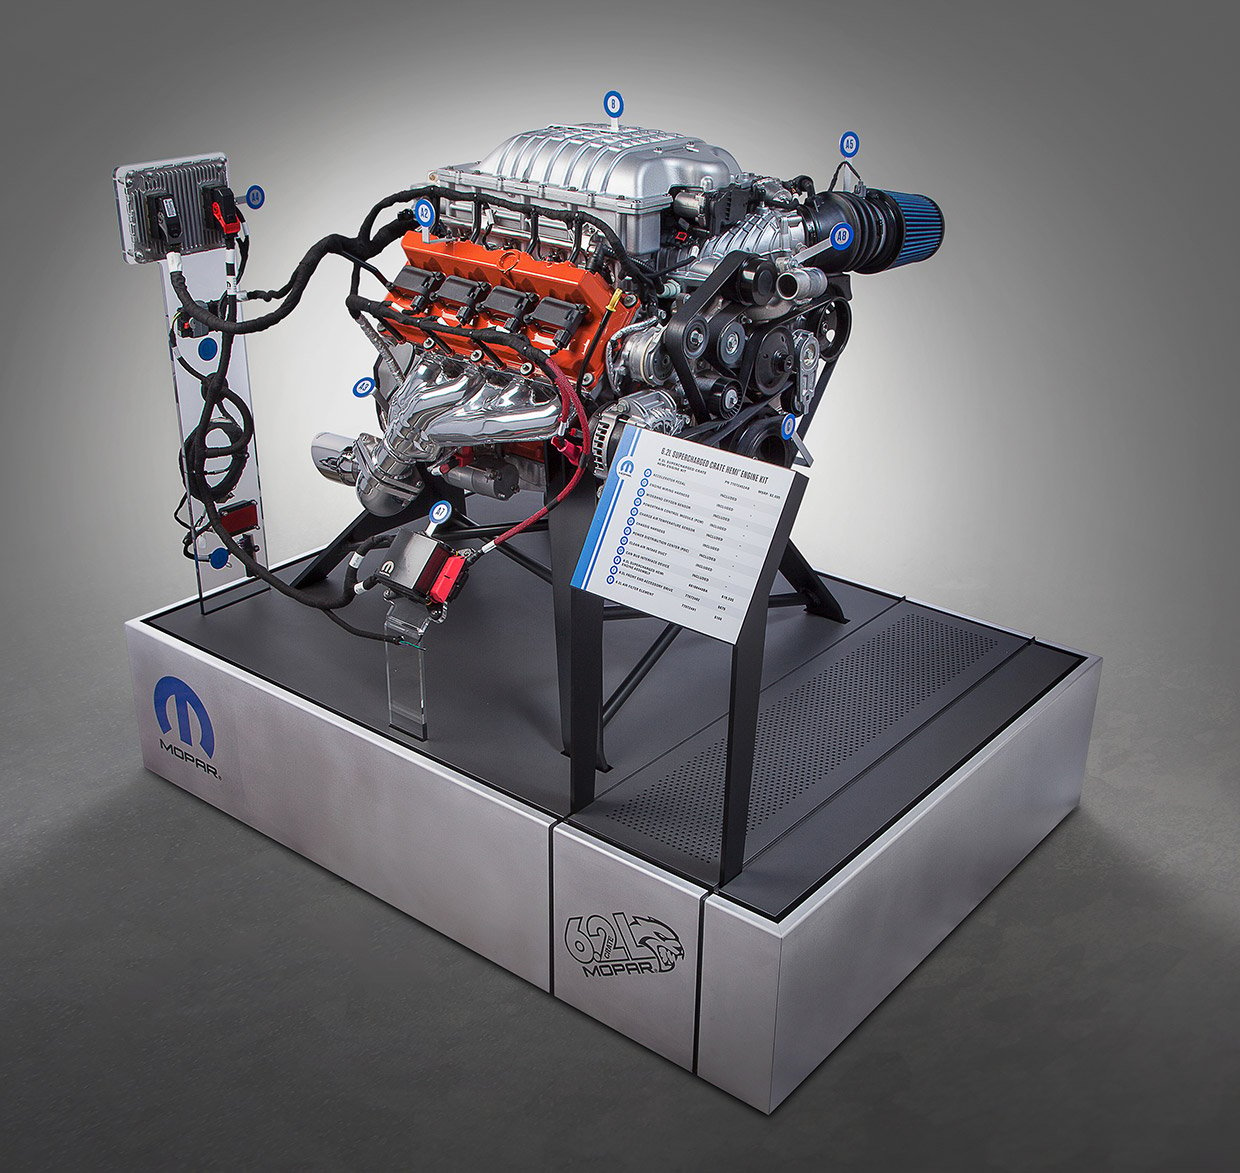 Mopar Lets Us Hellcat All the Things with the Hellcrate Engine